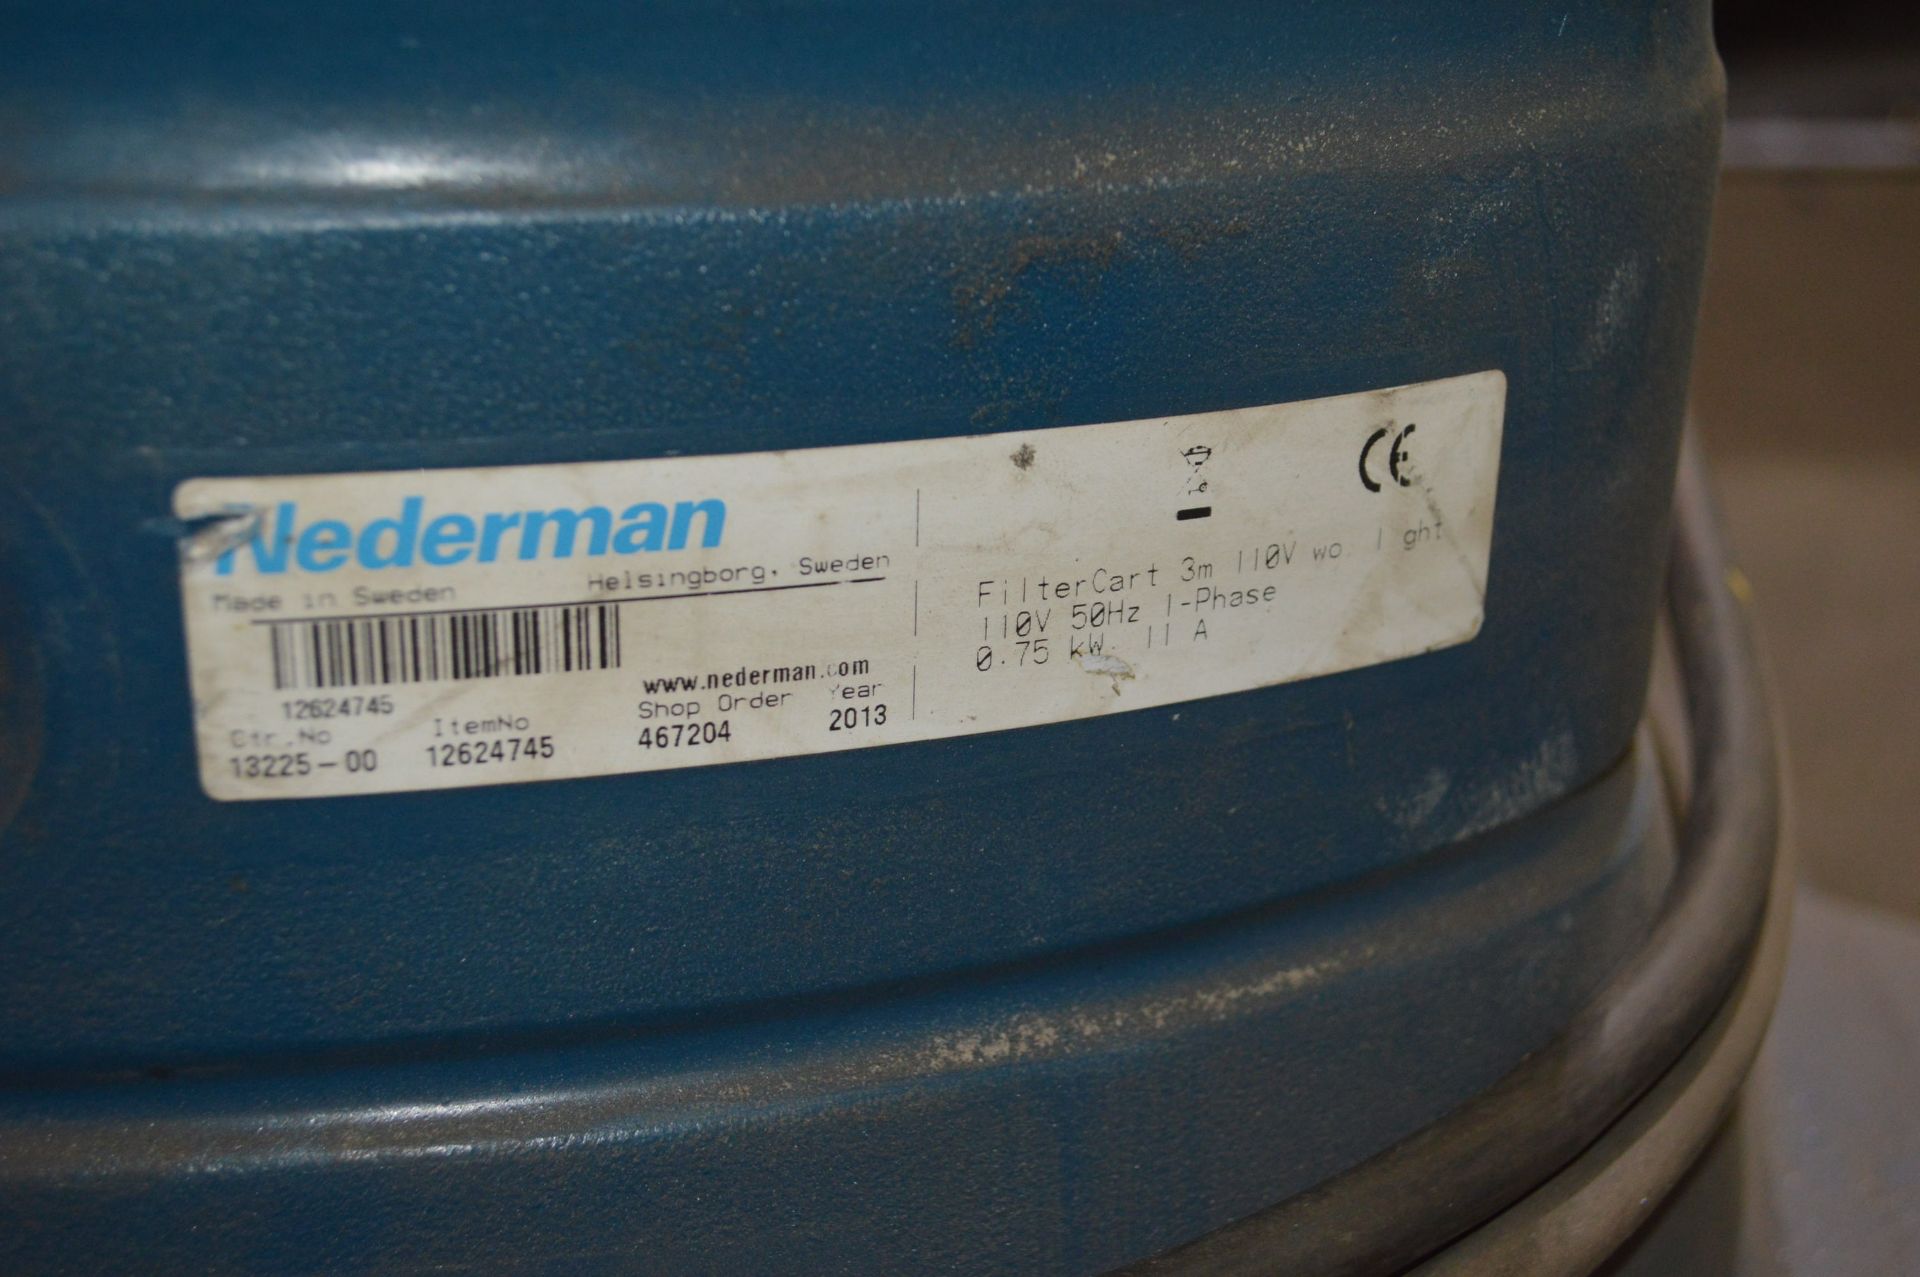 Nederman 13225-00 Mobile Fume Extraction Unit, serial no. 12624745 - Image 4 of 4